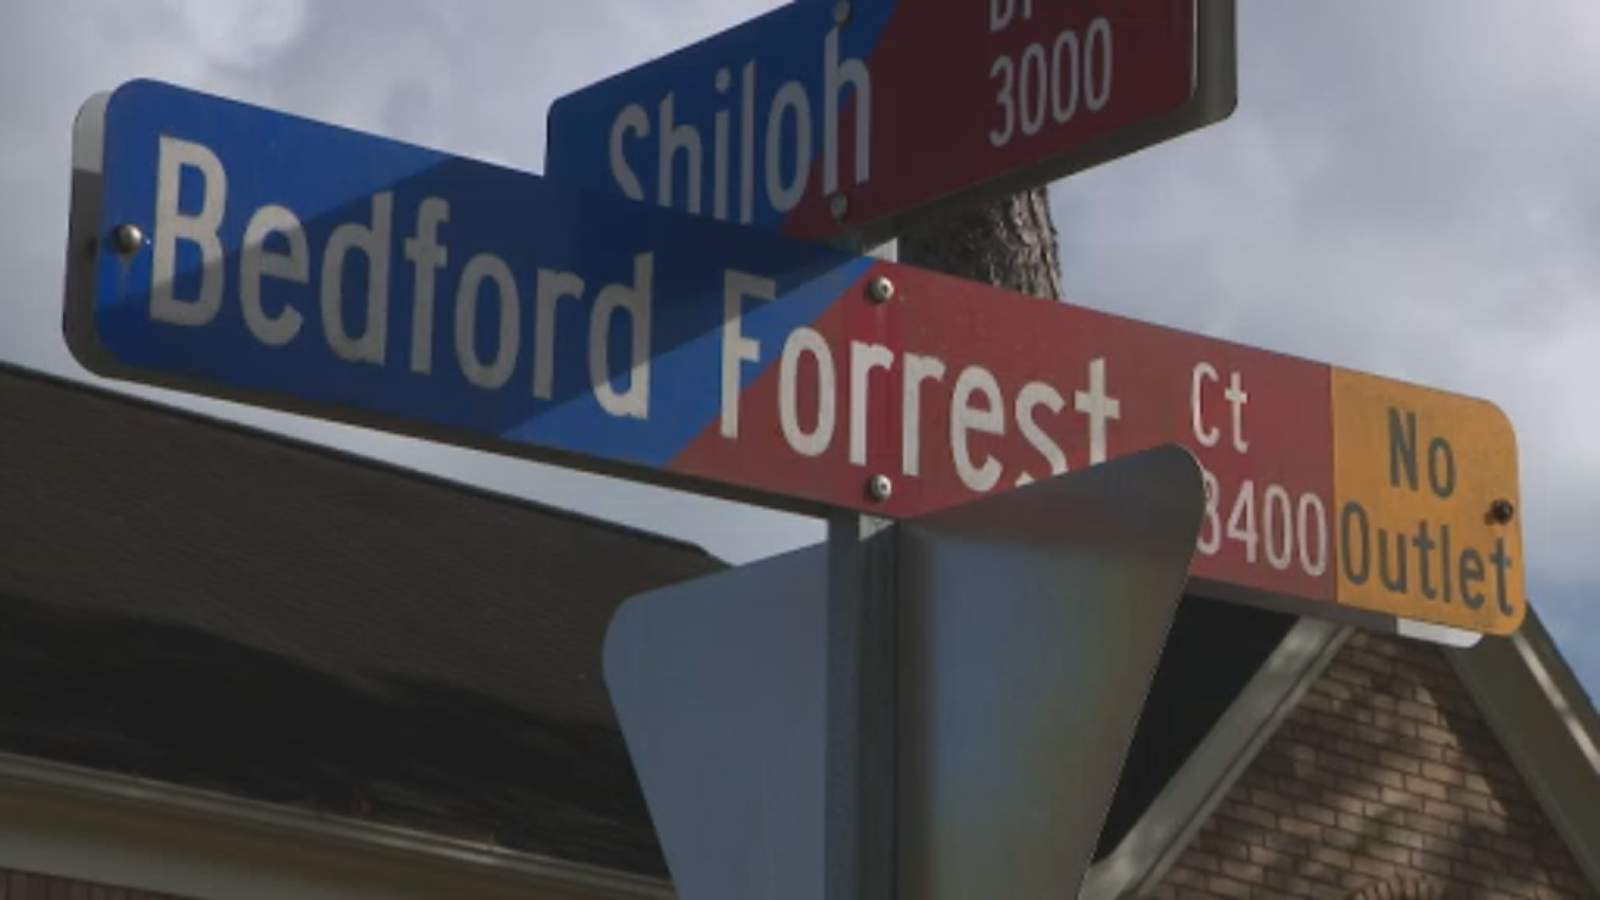 Missouri City councilmembers to hear public comments on street signs linked to KKK, Confederacy